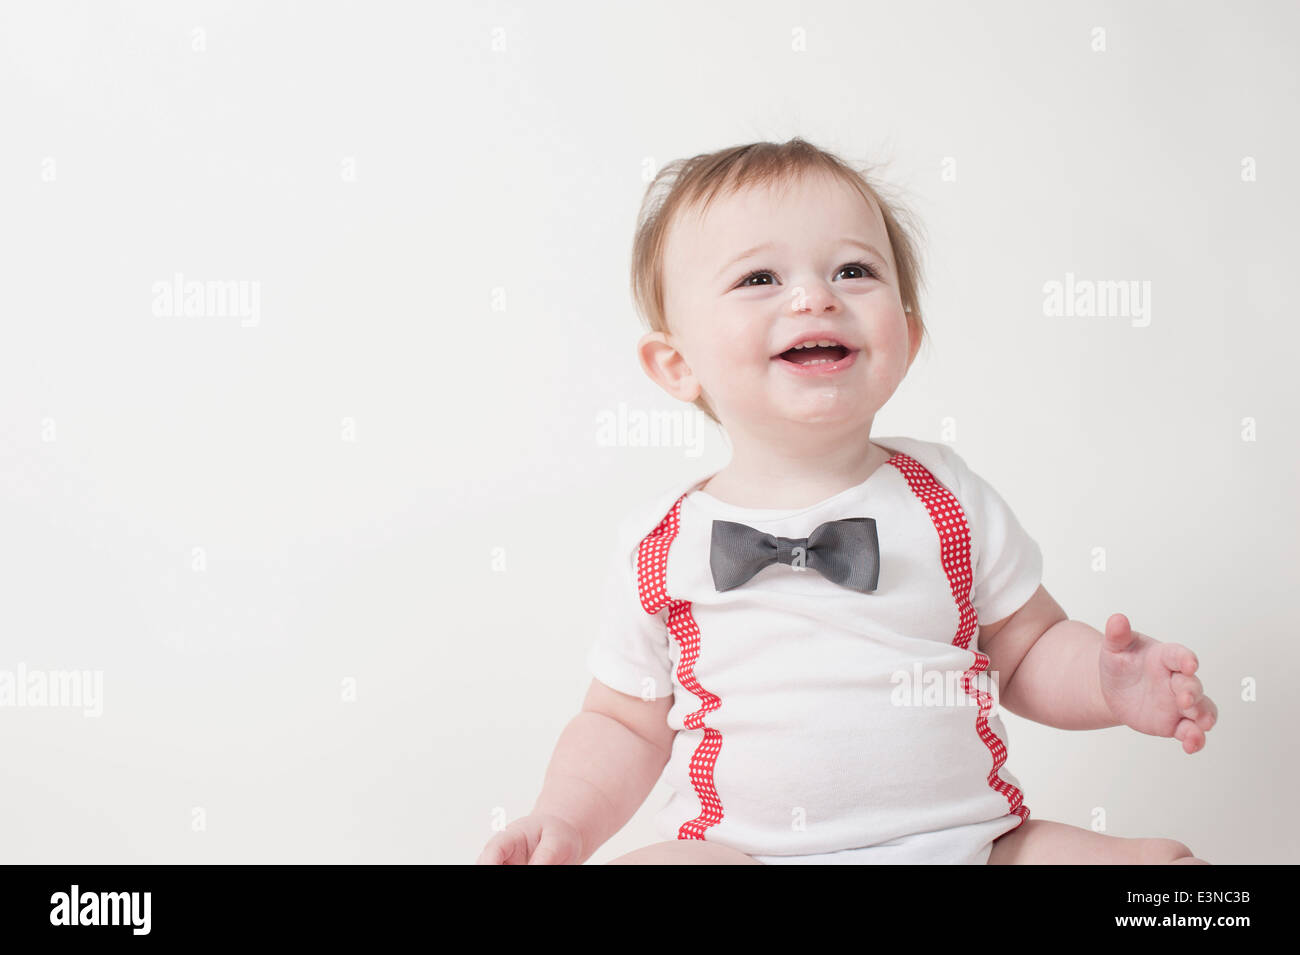 Happy baby boy looking away against white background Stock Photo